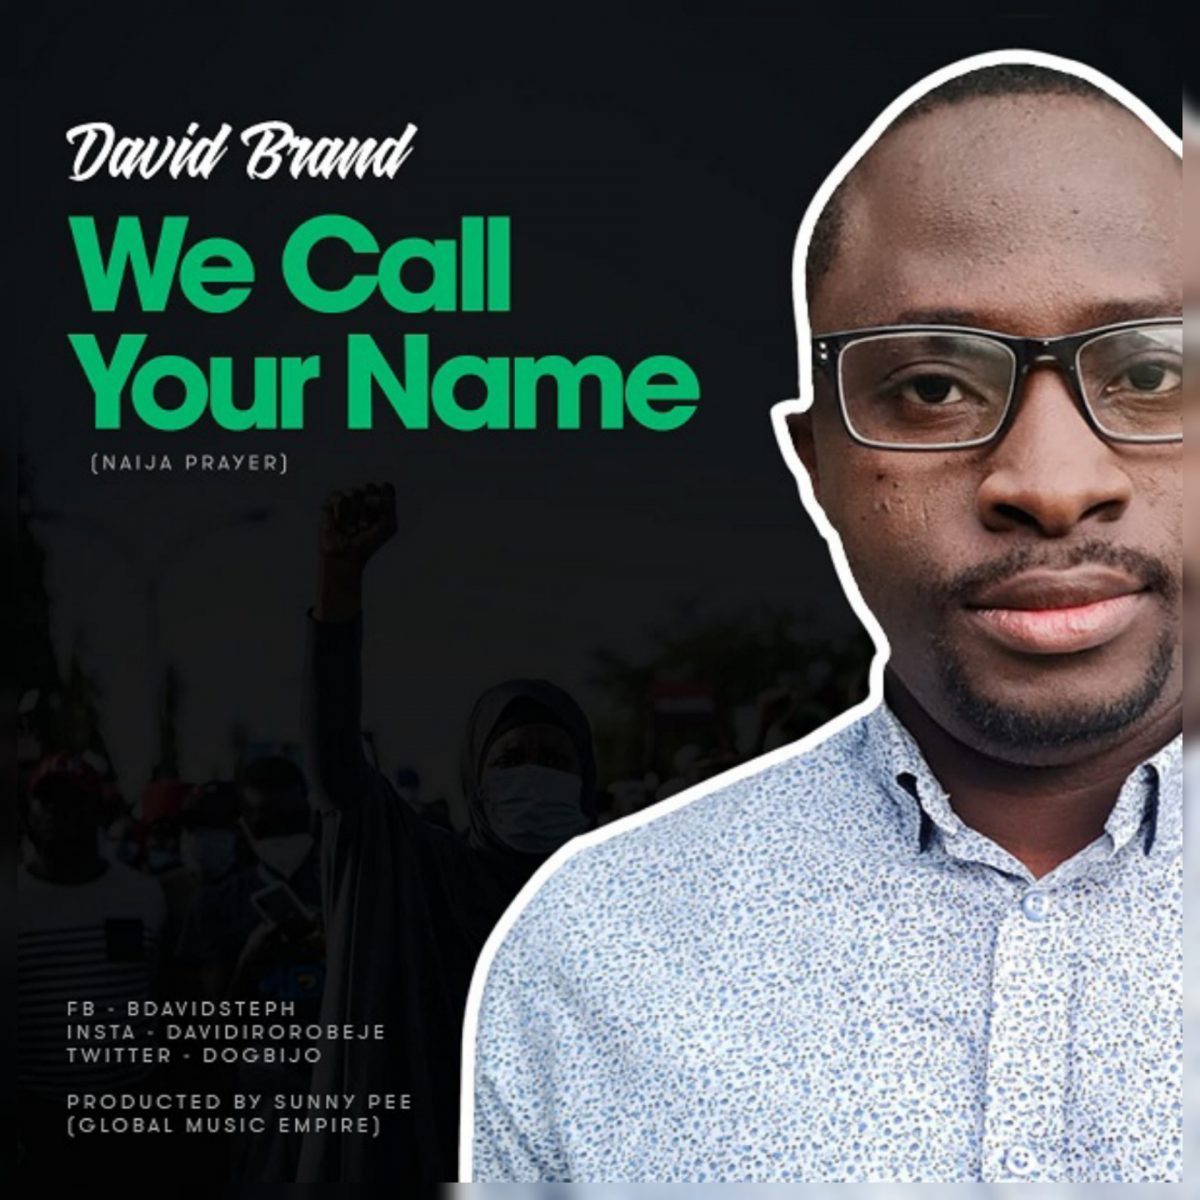 We Call your Name By David Brand